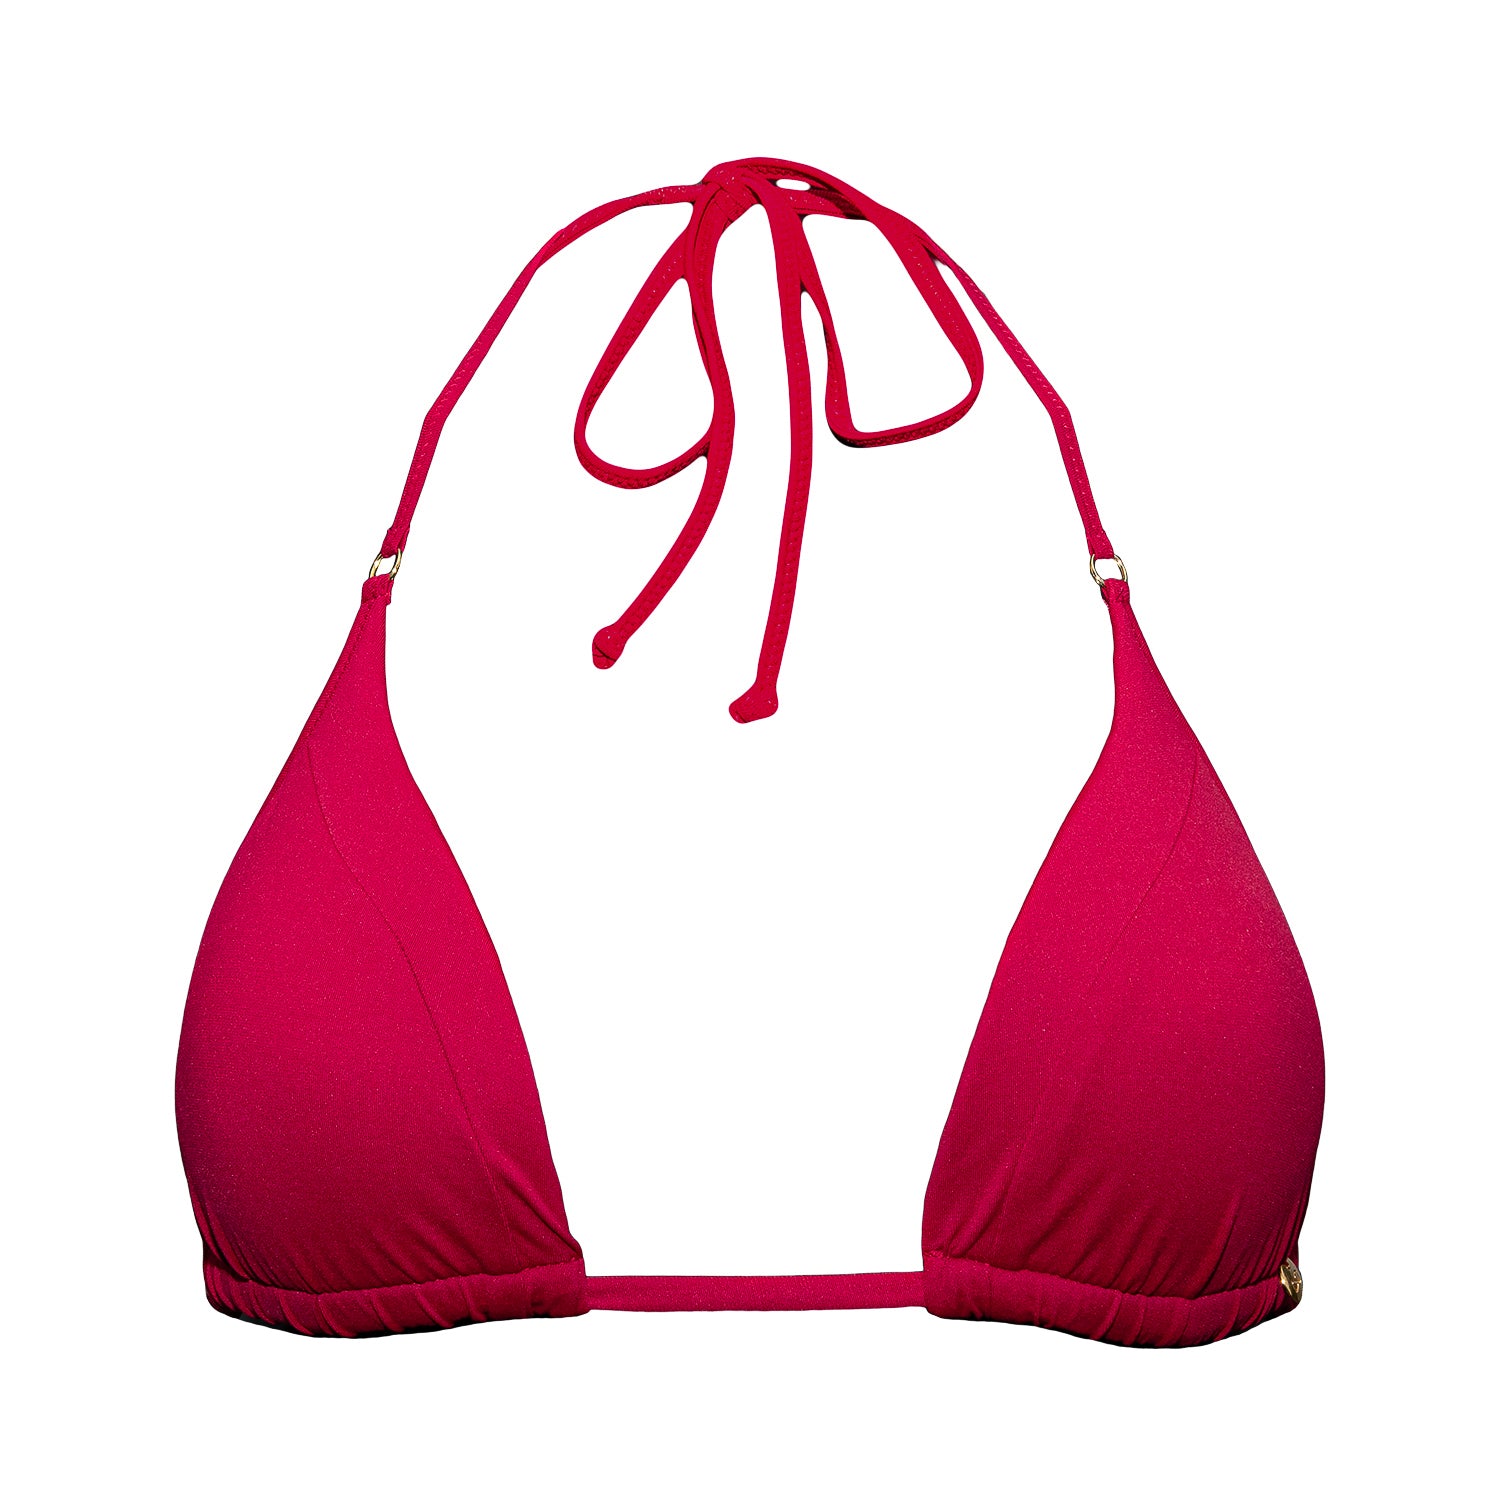 Red triangle bikini top with an extra soft touch, fine lining and thick feel. Made sustainably and ethically in Europe from finest polyamide. Perfected fit for every body shape.